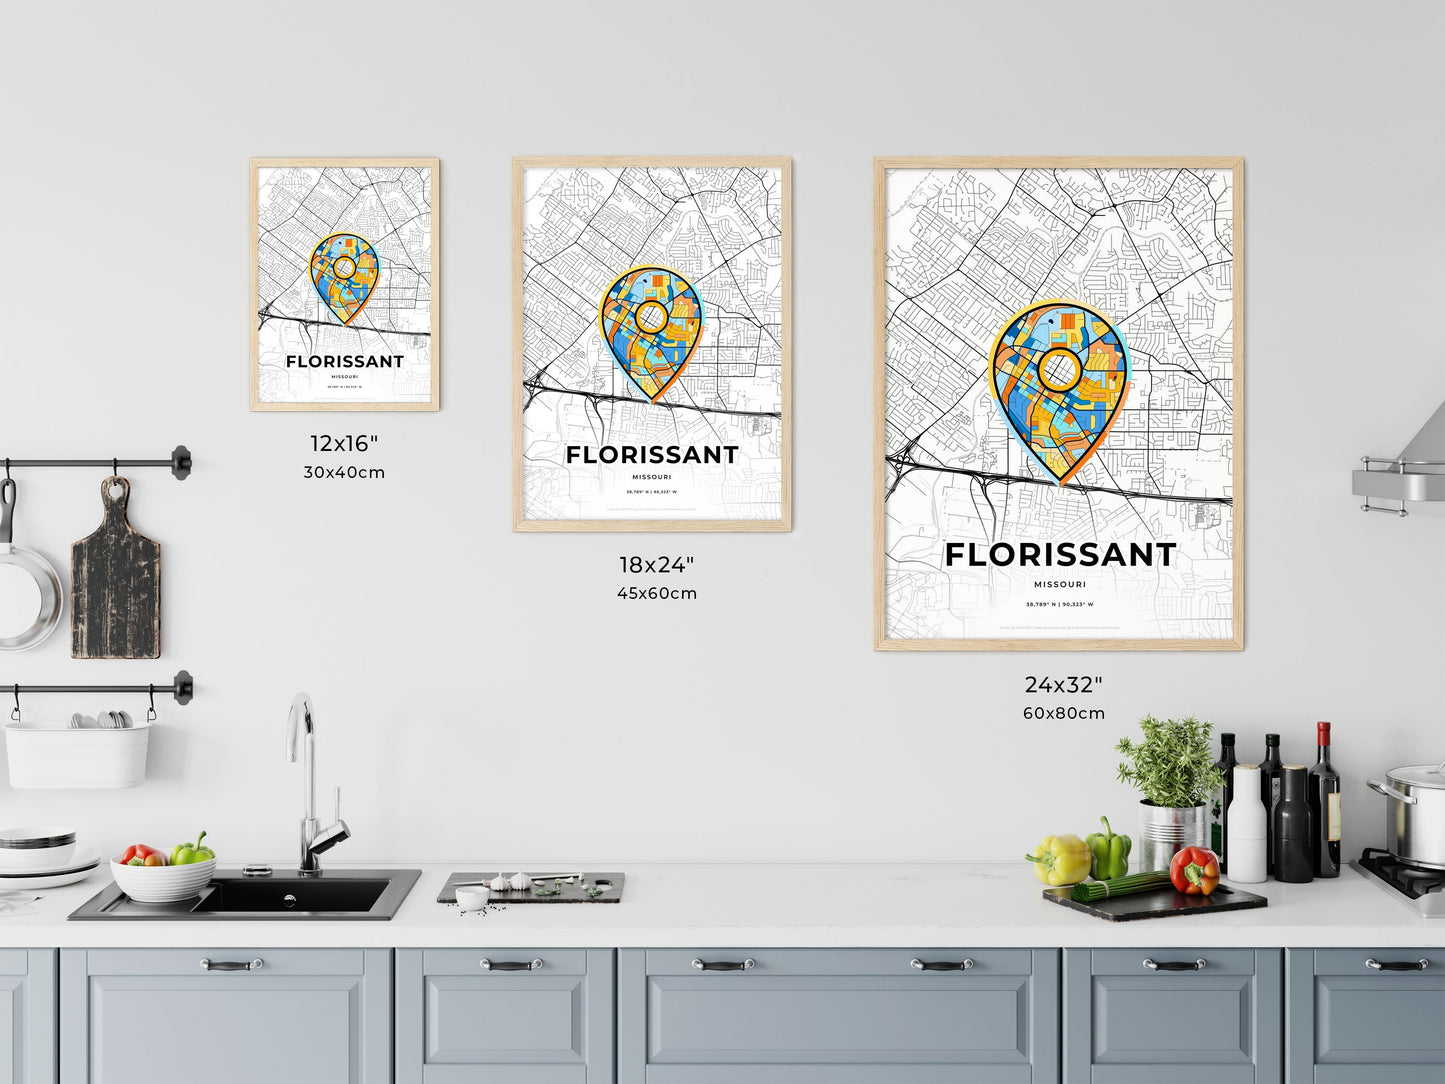 FLORISSANT MISSOURI minimal art map with a colorful icon. Where it all began, Couple map gift.